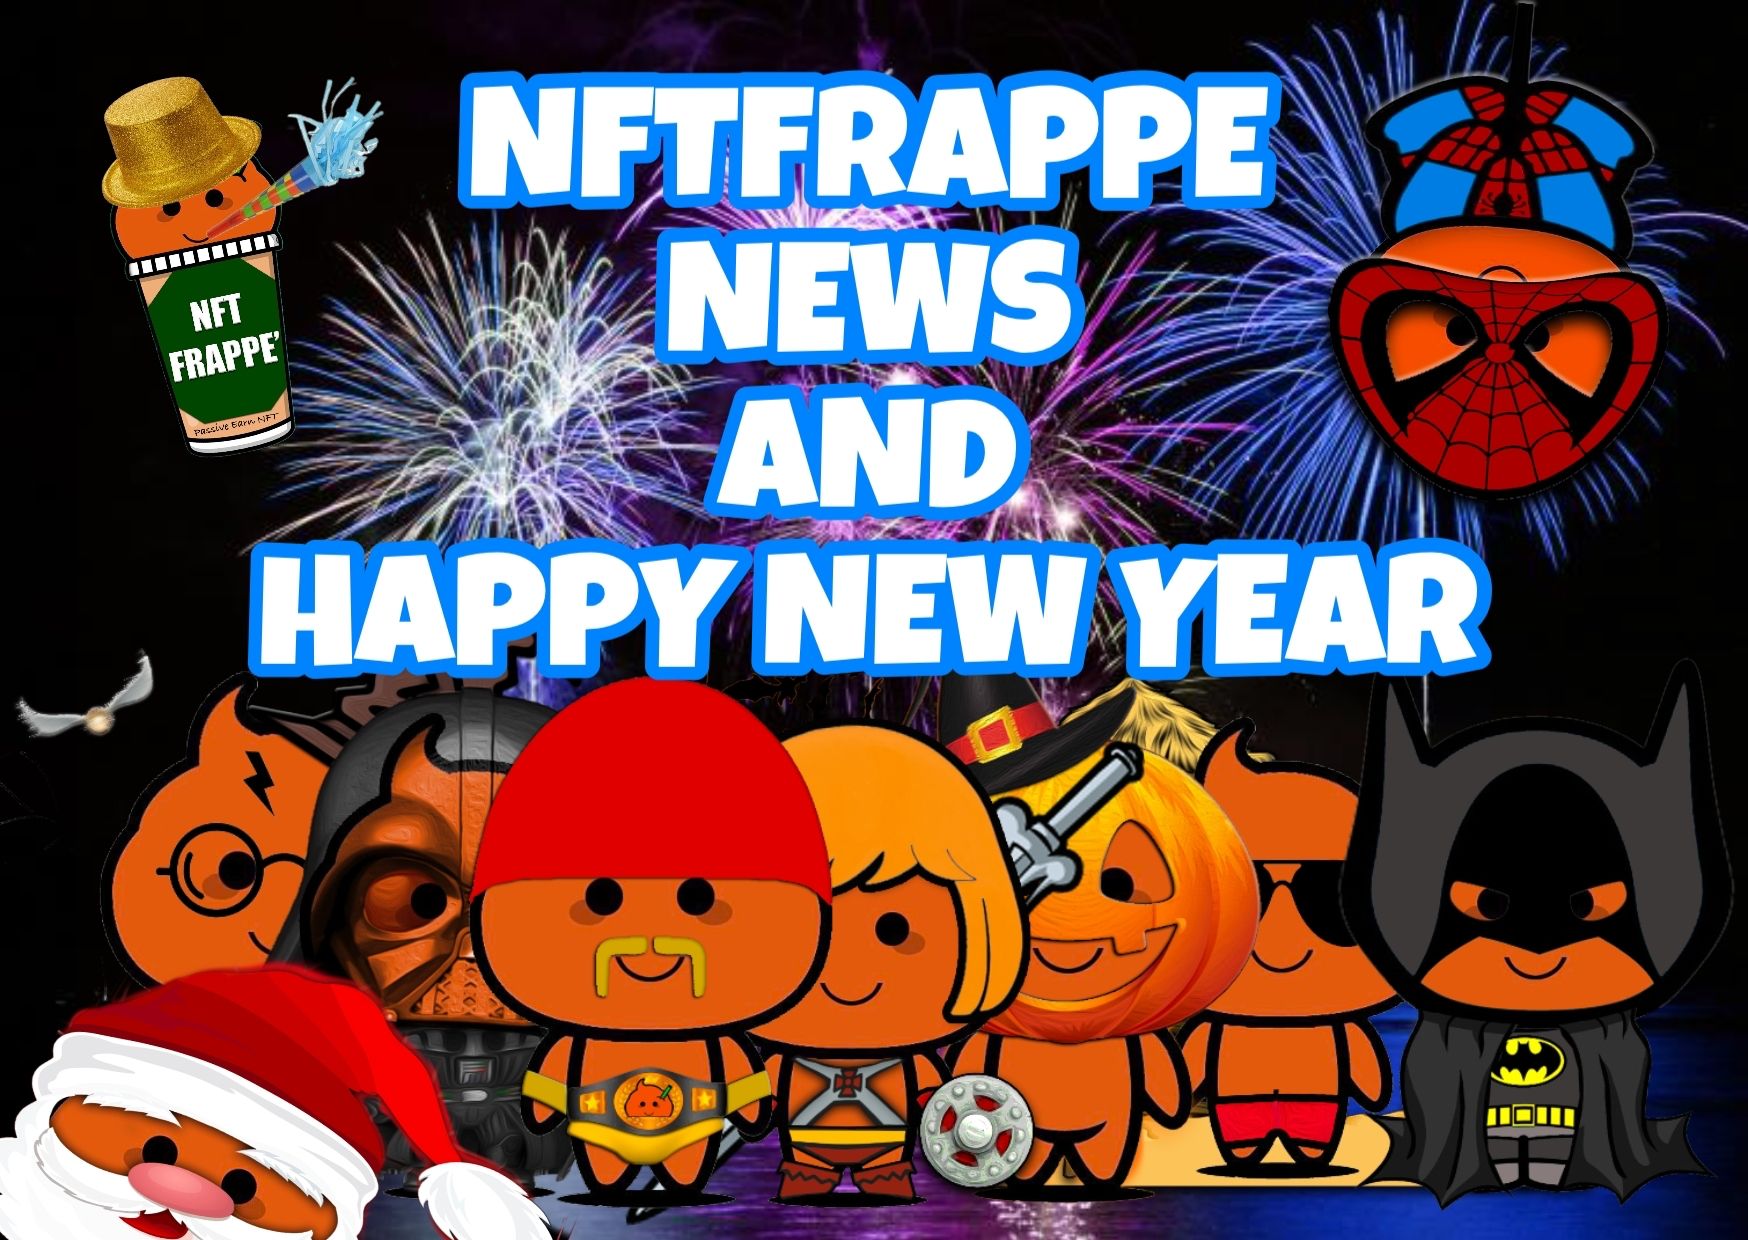 @nftfrappe/nftfrappe-news-and-happy-new-year-engita